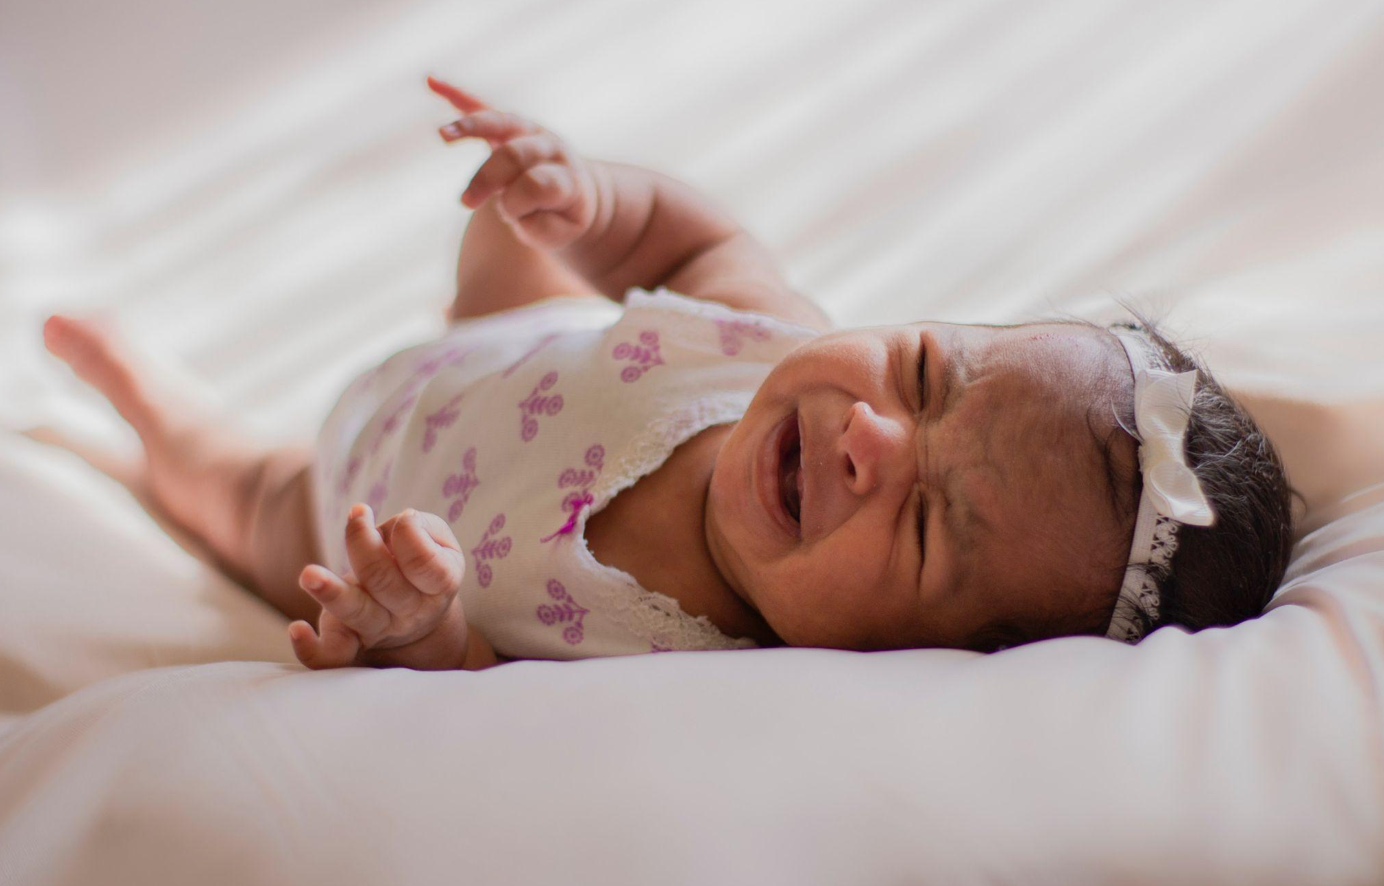 Baby in a onesie on a bed, crying; image by Laura Garcia, via Pexels.com.